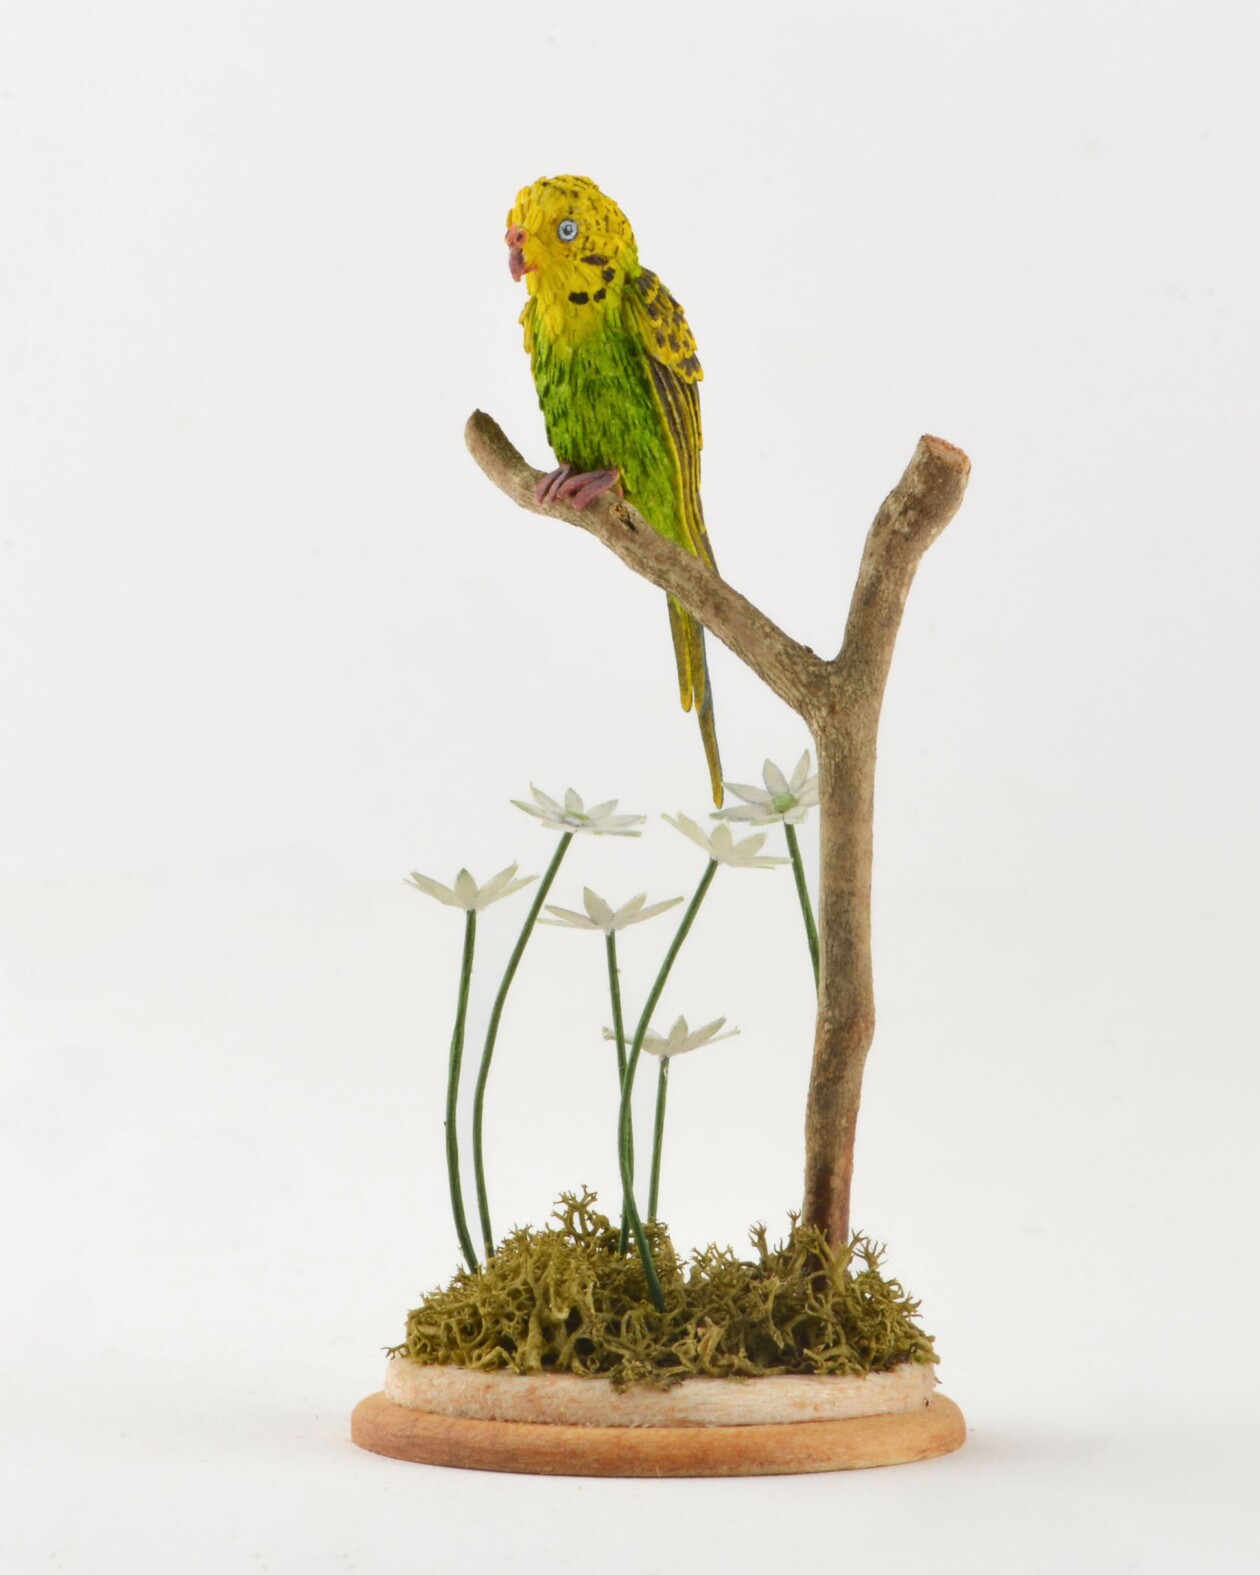 Miniature Bird Paper Sculptures With Whimsical Details By Nayan And Venus (10)